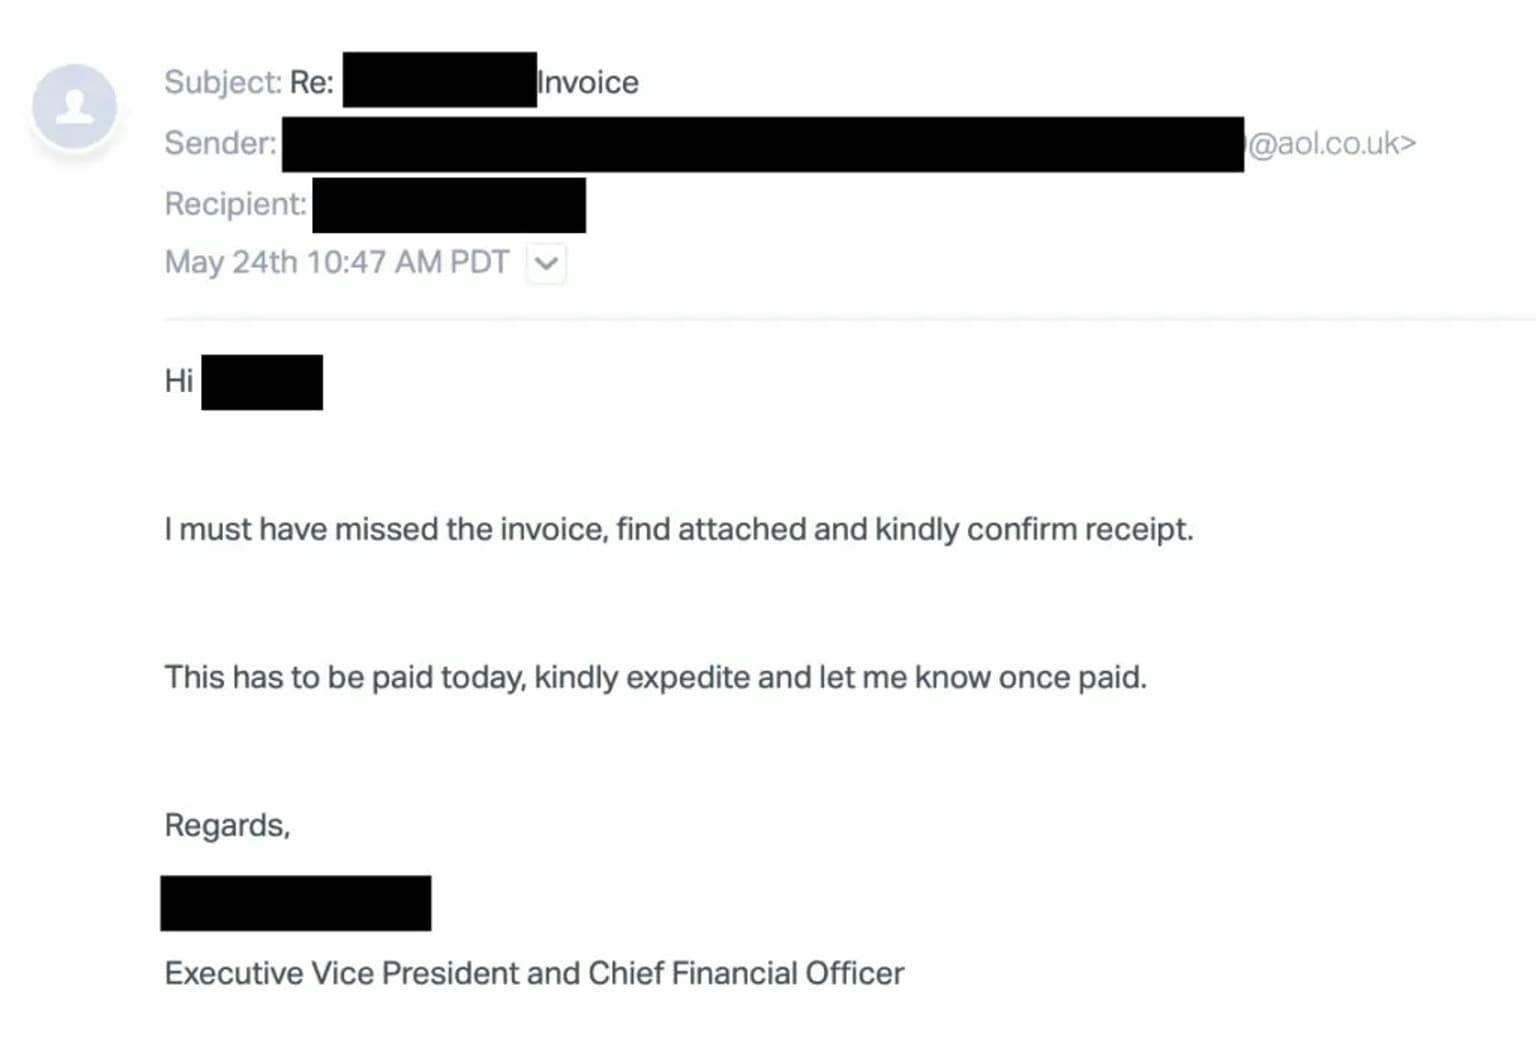 Executive impersonation whaling phishing email